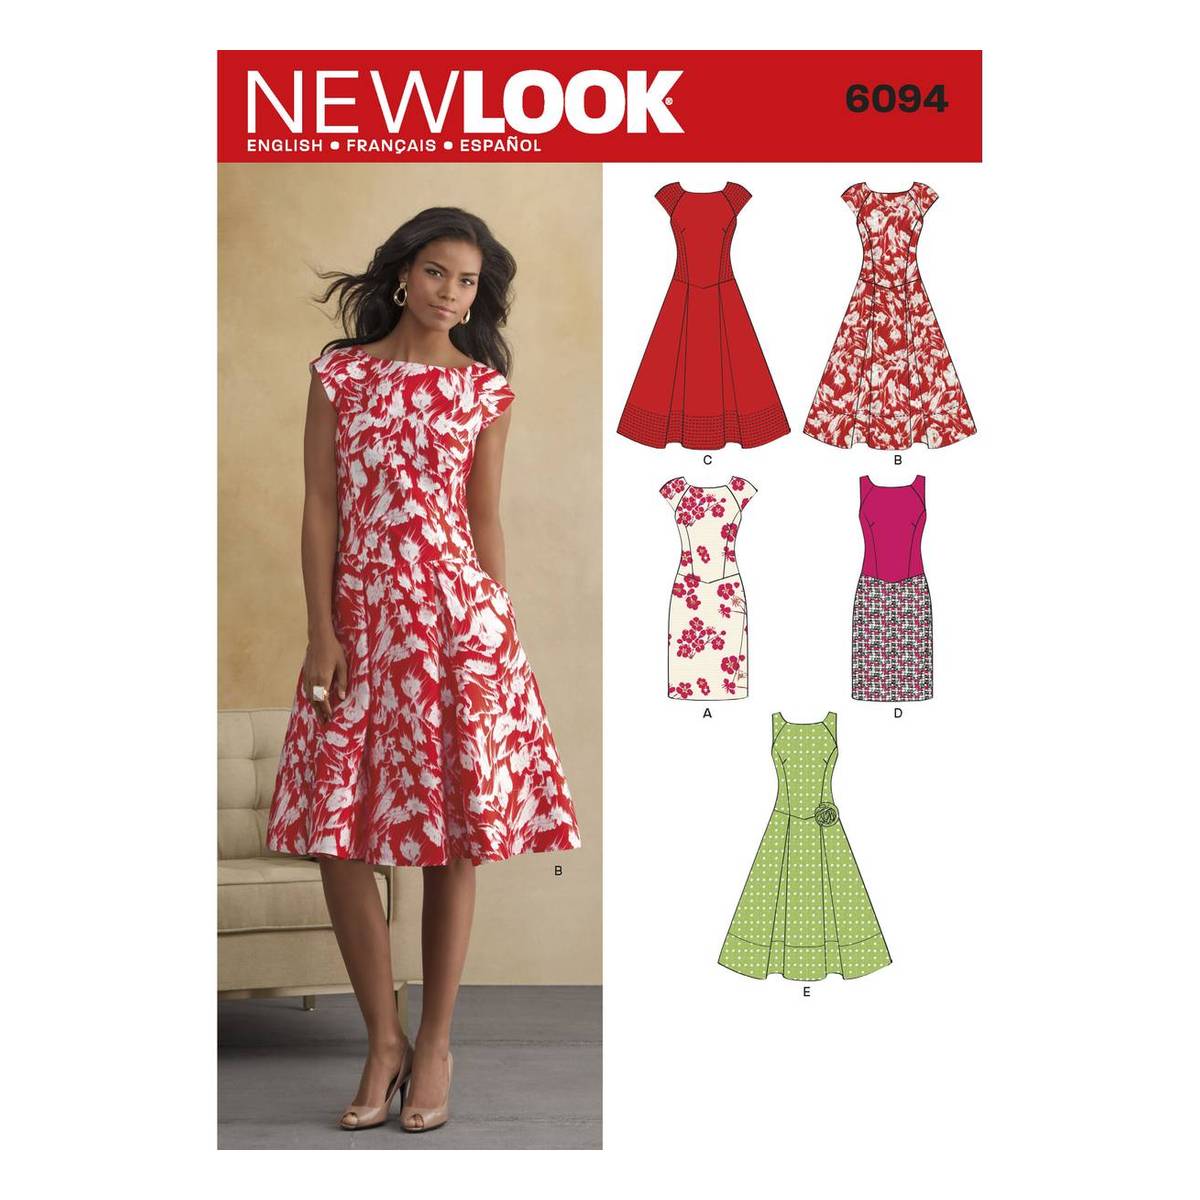 Simplicity New Look 6262 Pattern Review - My Christmas Dress. - Sew Dainty